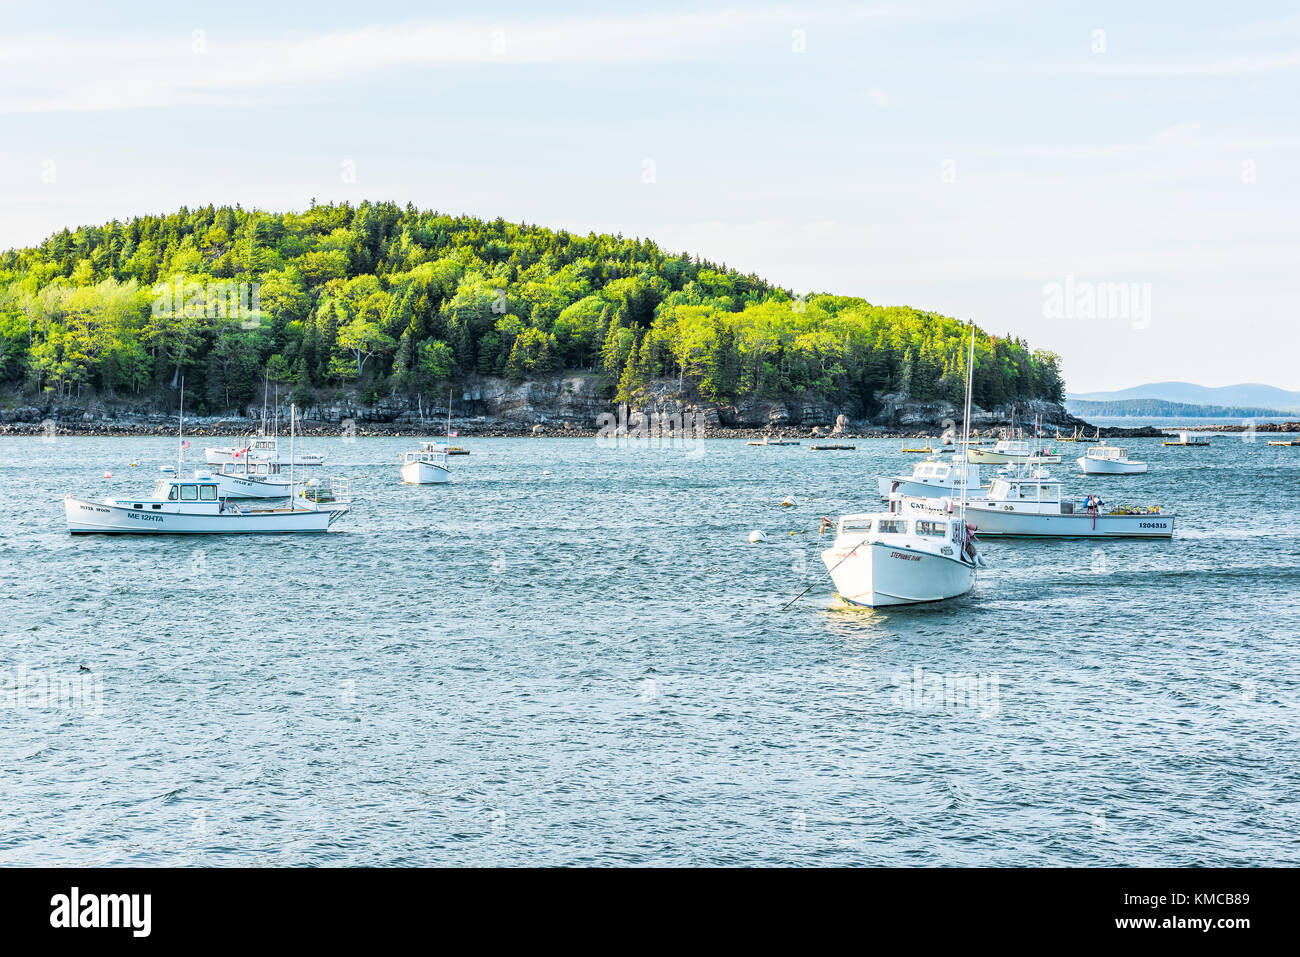 Bar Harbor, USA - June 8, 2017: Sunset in Bar Harbor, Maine village with empty sailing boats, vessels, ships on water Stock Photo